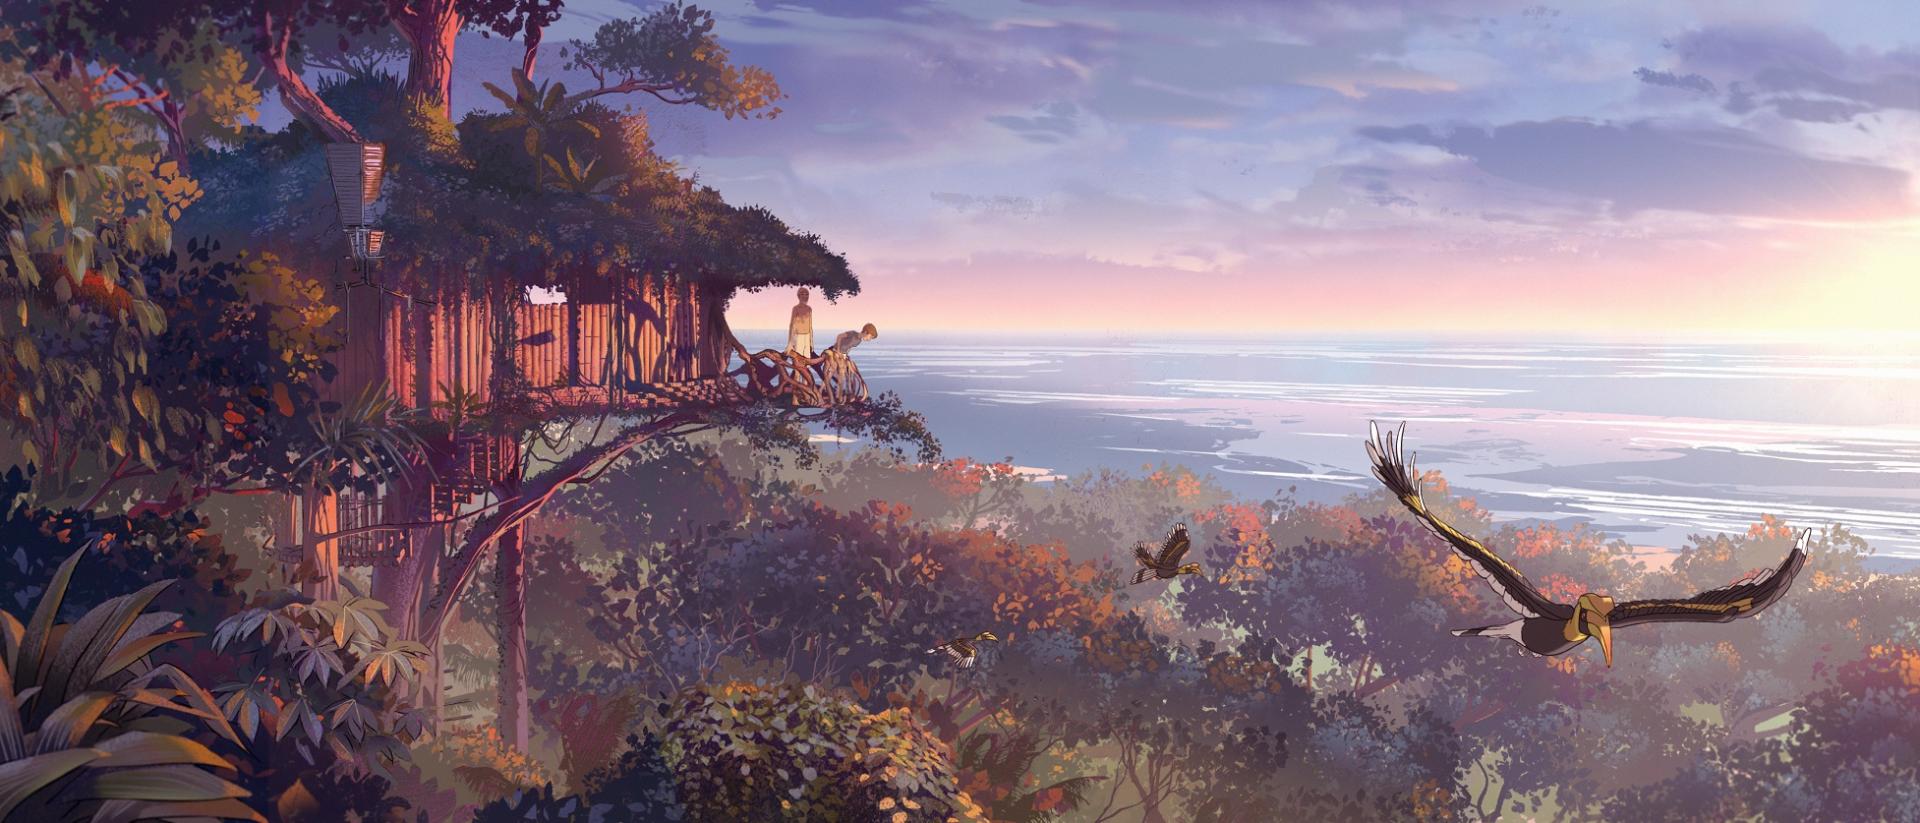 still from kensuke's kingdom featuring a treehouse overlooking a jungle with birds flying by